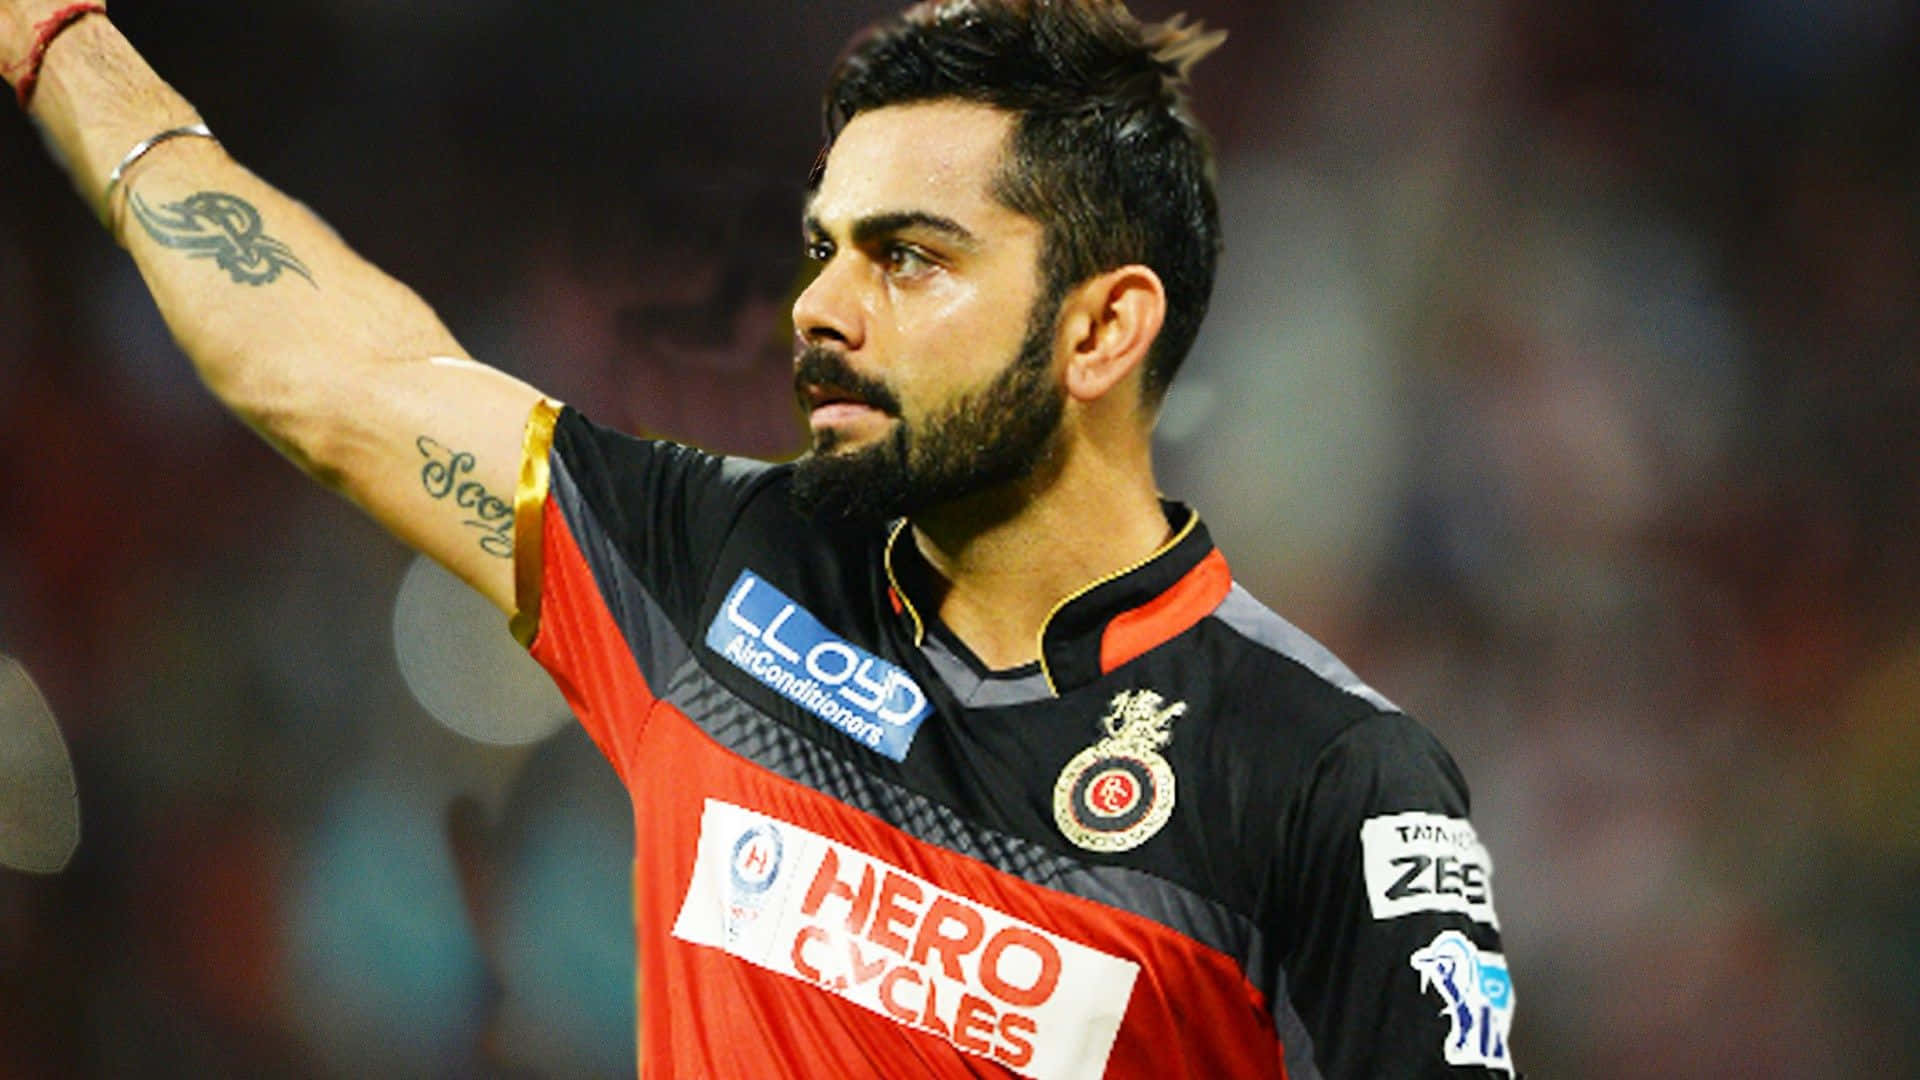 Royal Challengers Bangalore - Together, We’re Unstoppable